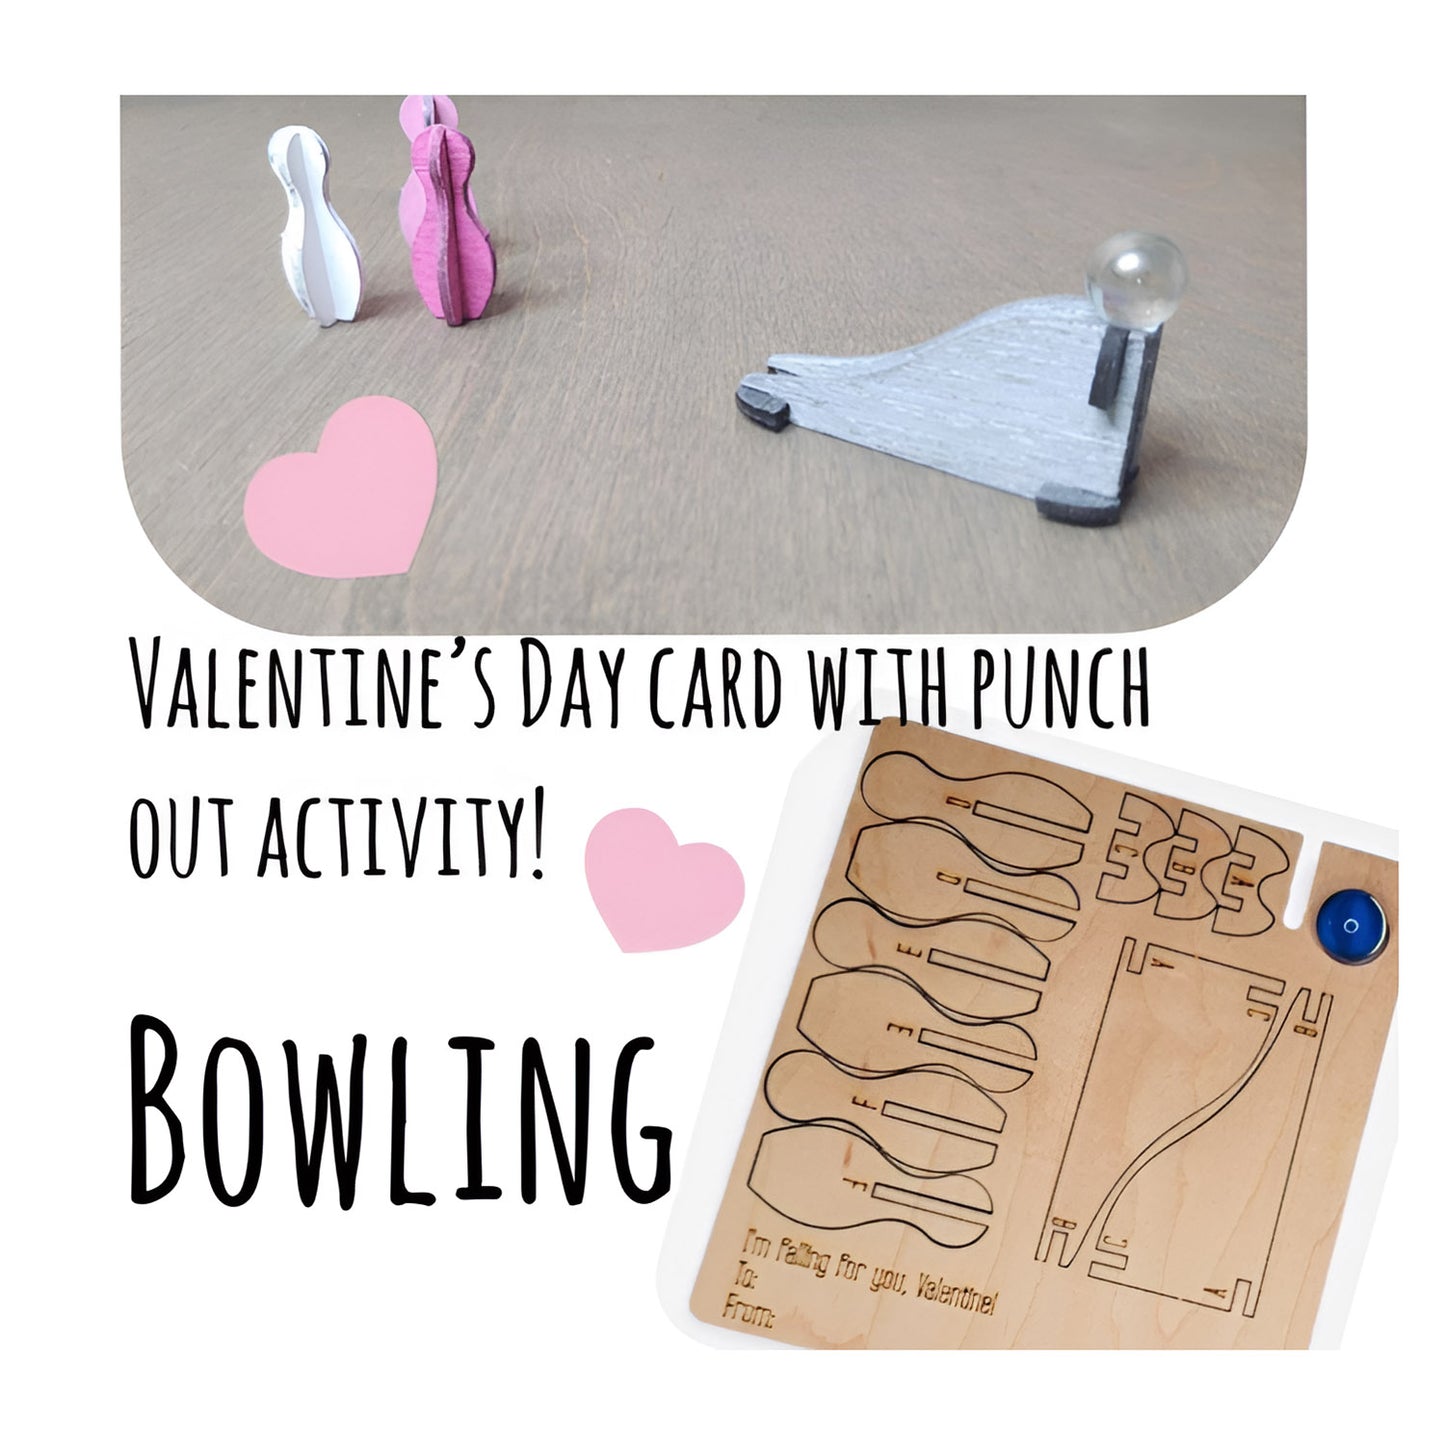 Personalized Valentine's Day Card with Fun Punch Out Bowling